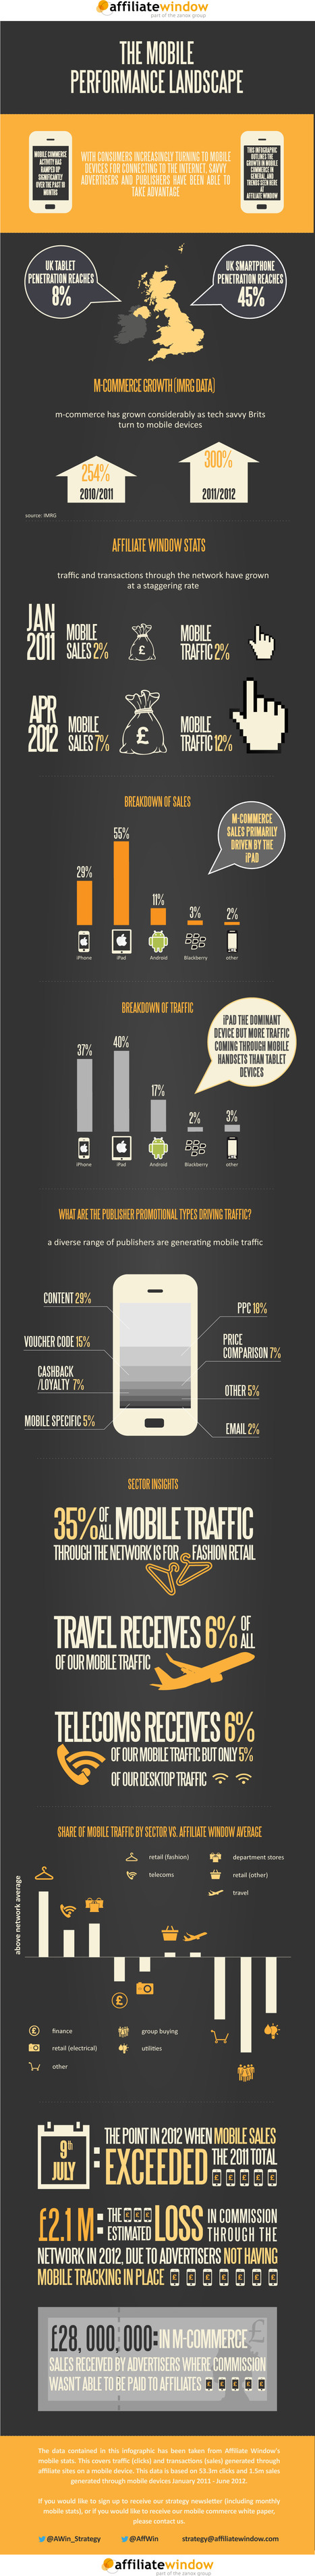 MCommerce Is All About The Pad [infographic] | BI Revolution | Scoop.it